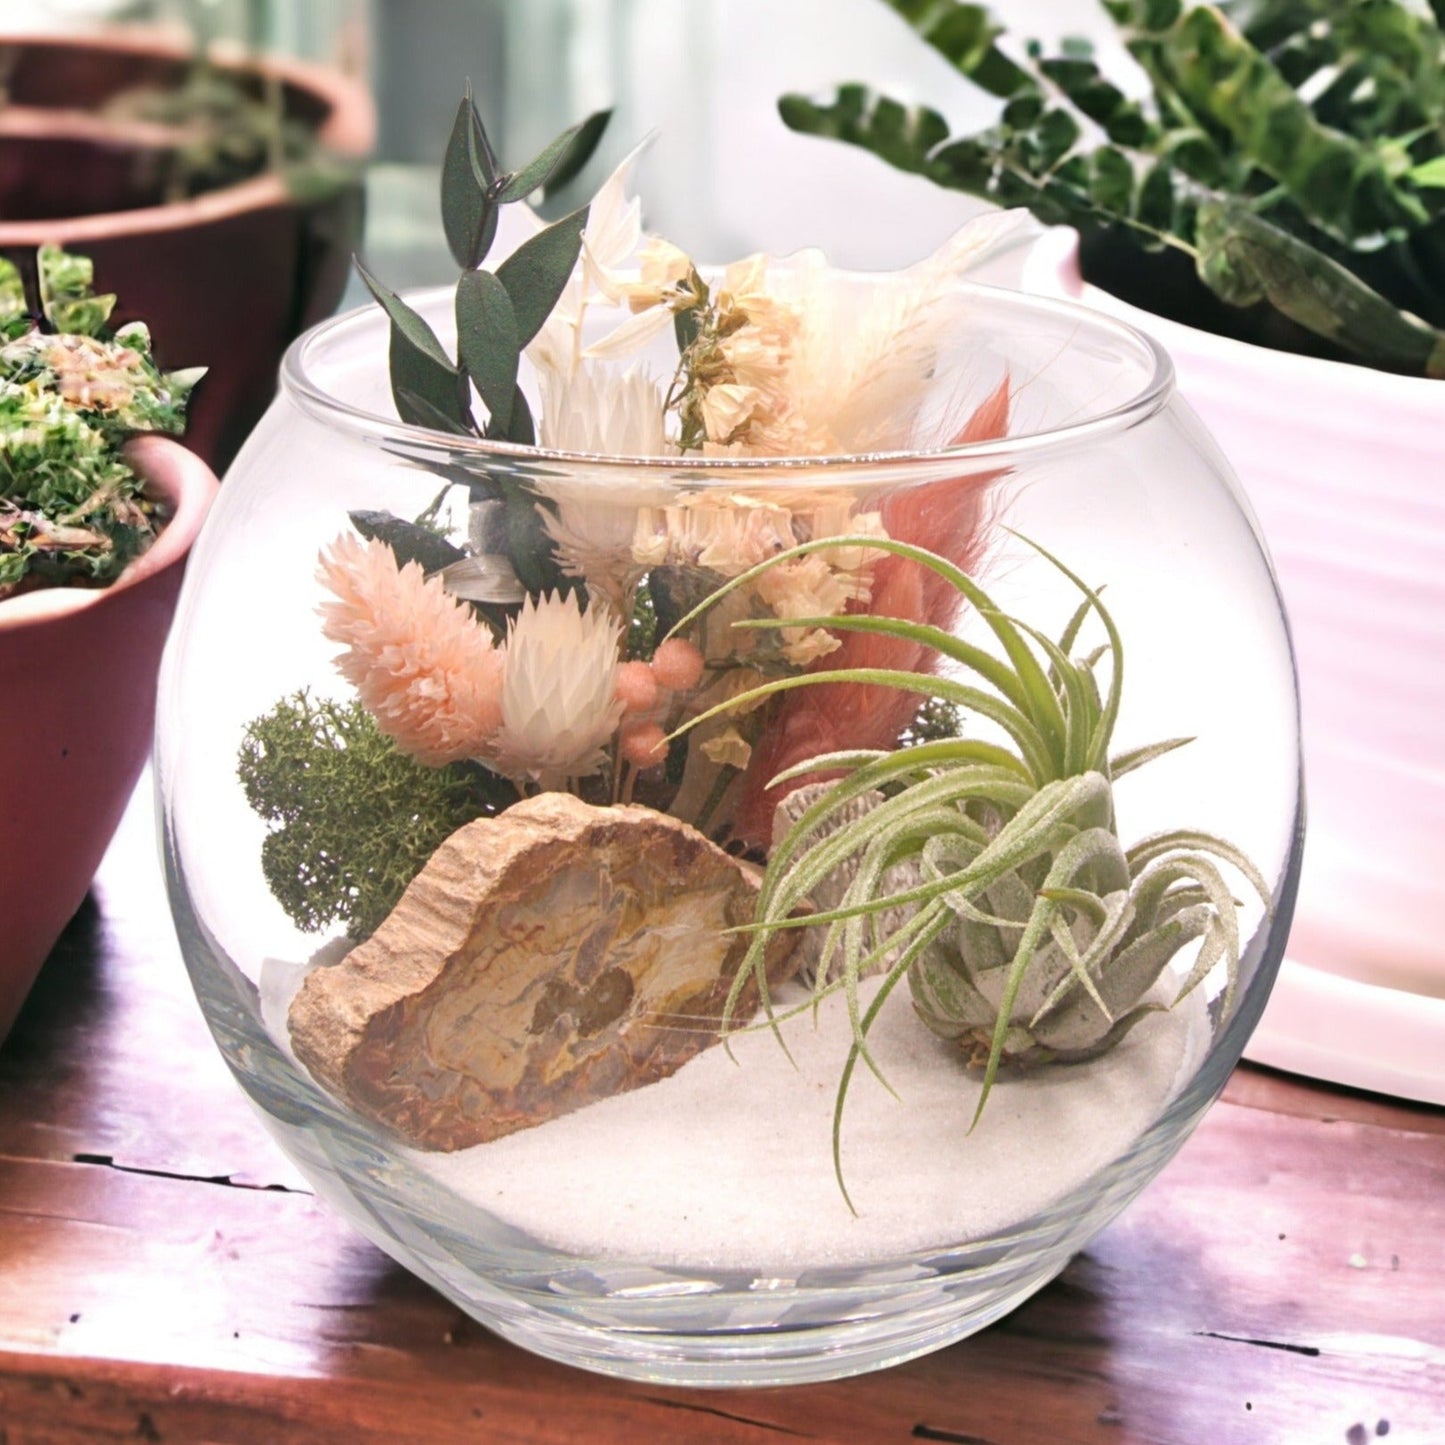 Glass bowl airplant terrarium with dried flowers and fossilized wood